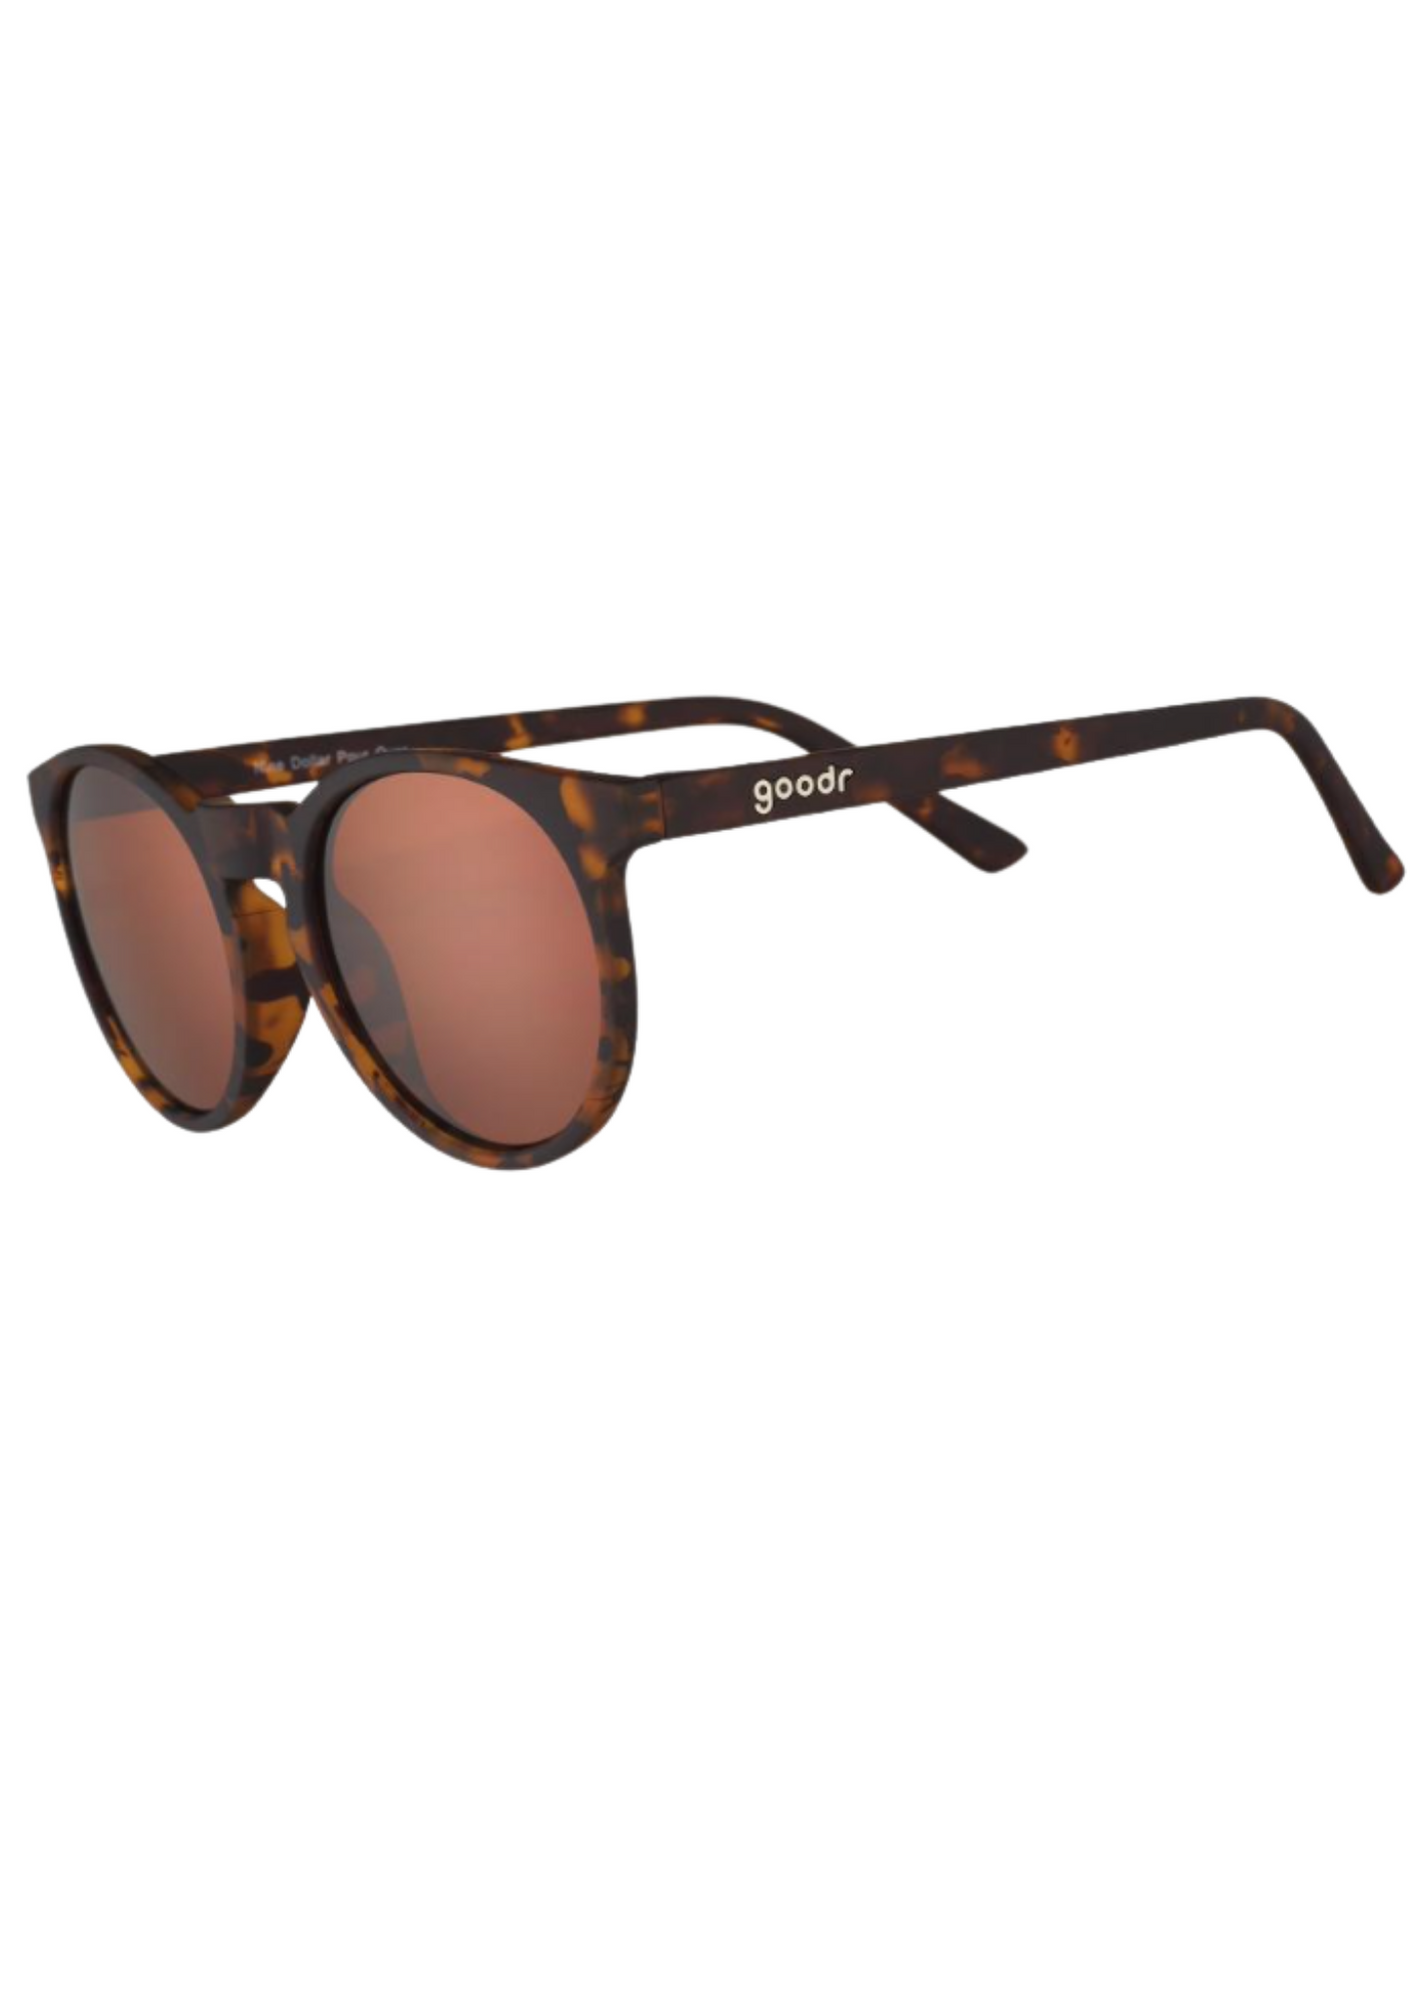 The Circle G Shades - Assorted